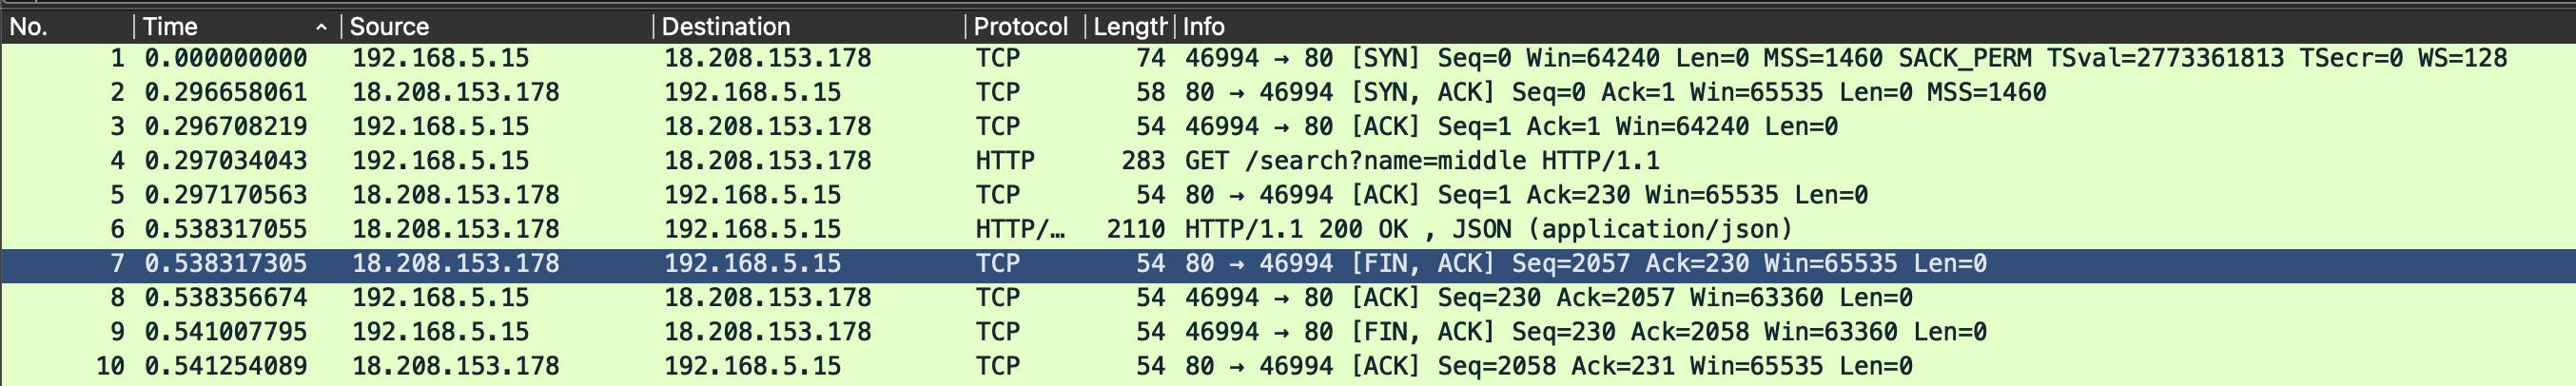 Wireshark image of a HTTP call